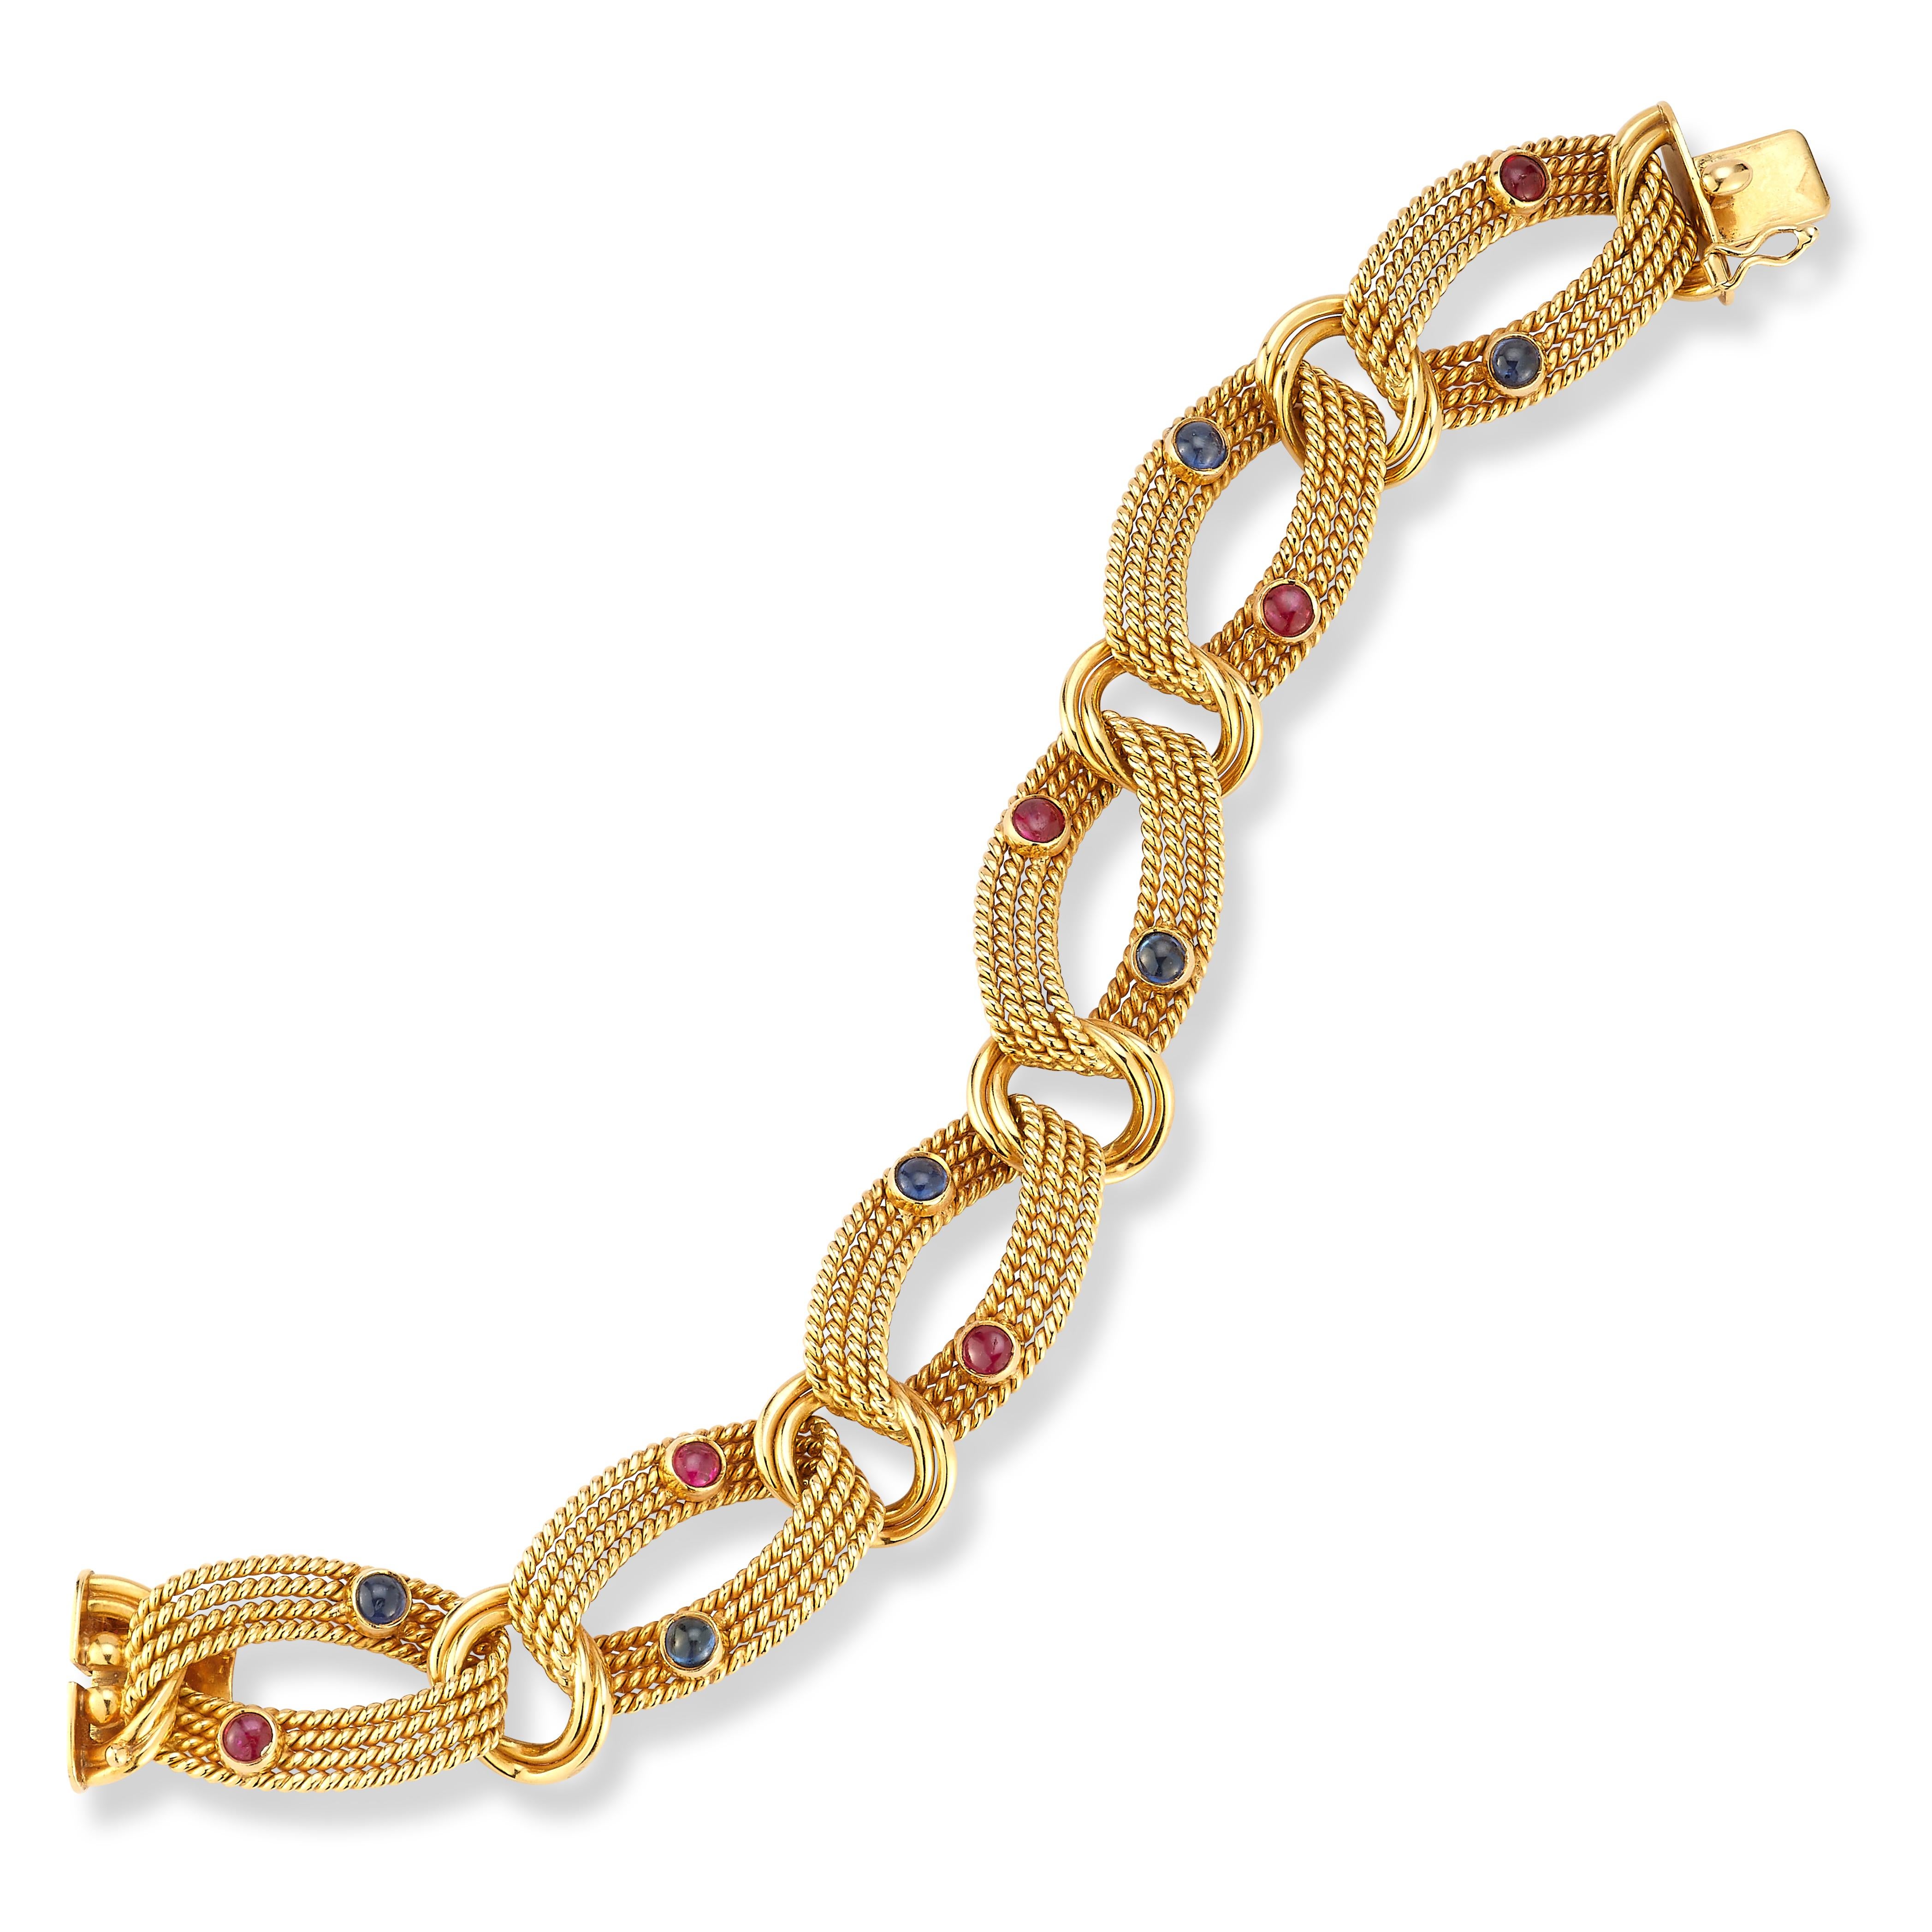 Tiffany & Co. Sapphire & Ruby Gold Bracelet

An 18 karat textured yellow gold link bracelet consisting of 6 rope motif links each set with a cabochon sapphire and a cabochon ruby

Measurements: 7.5